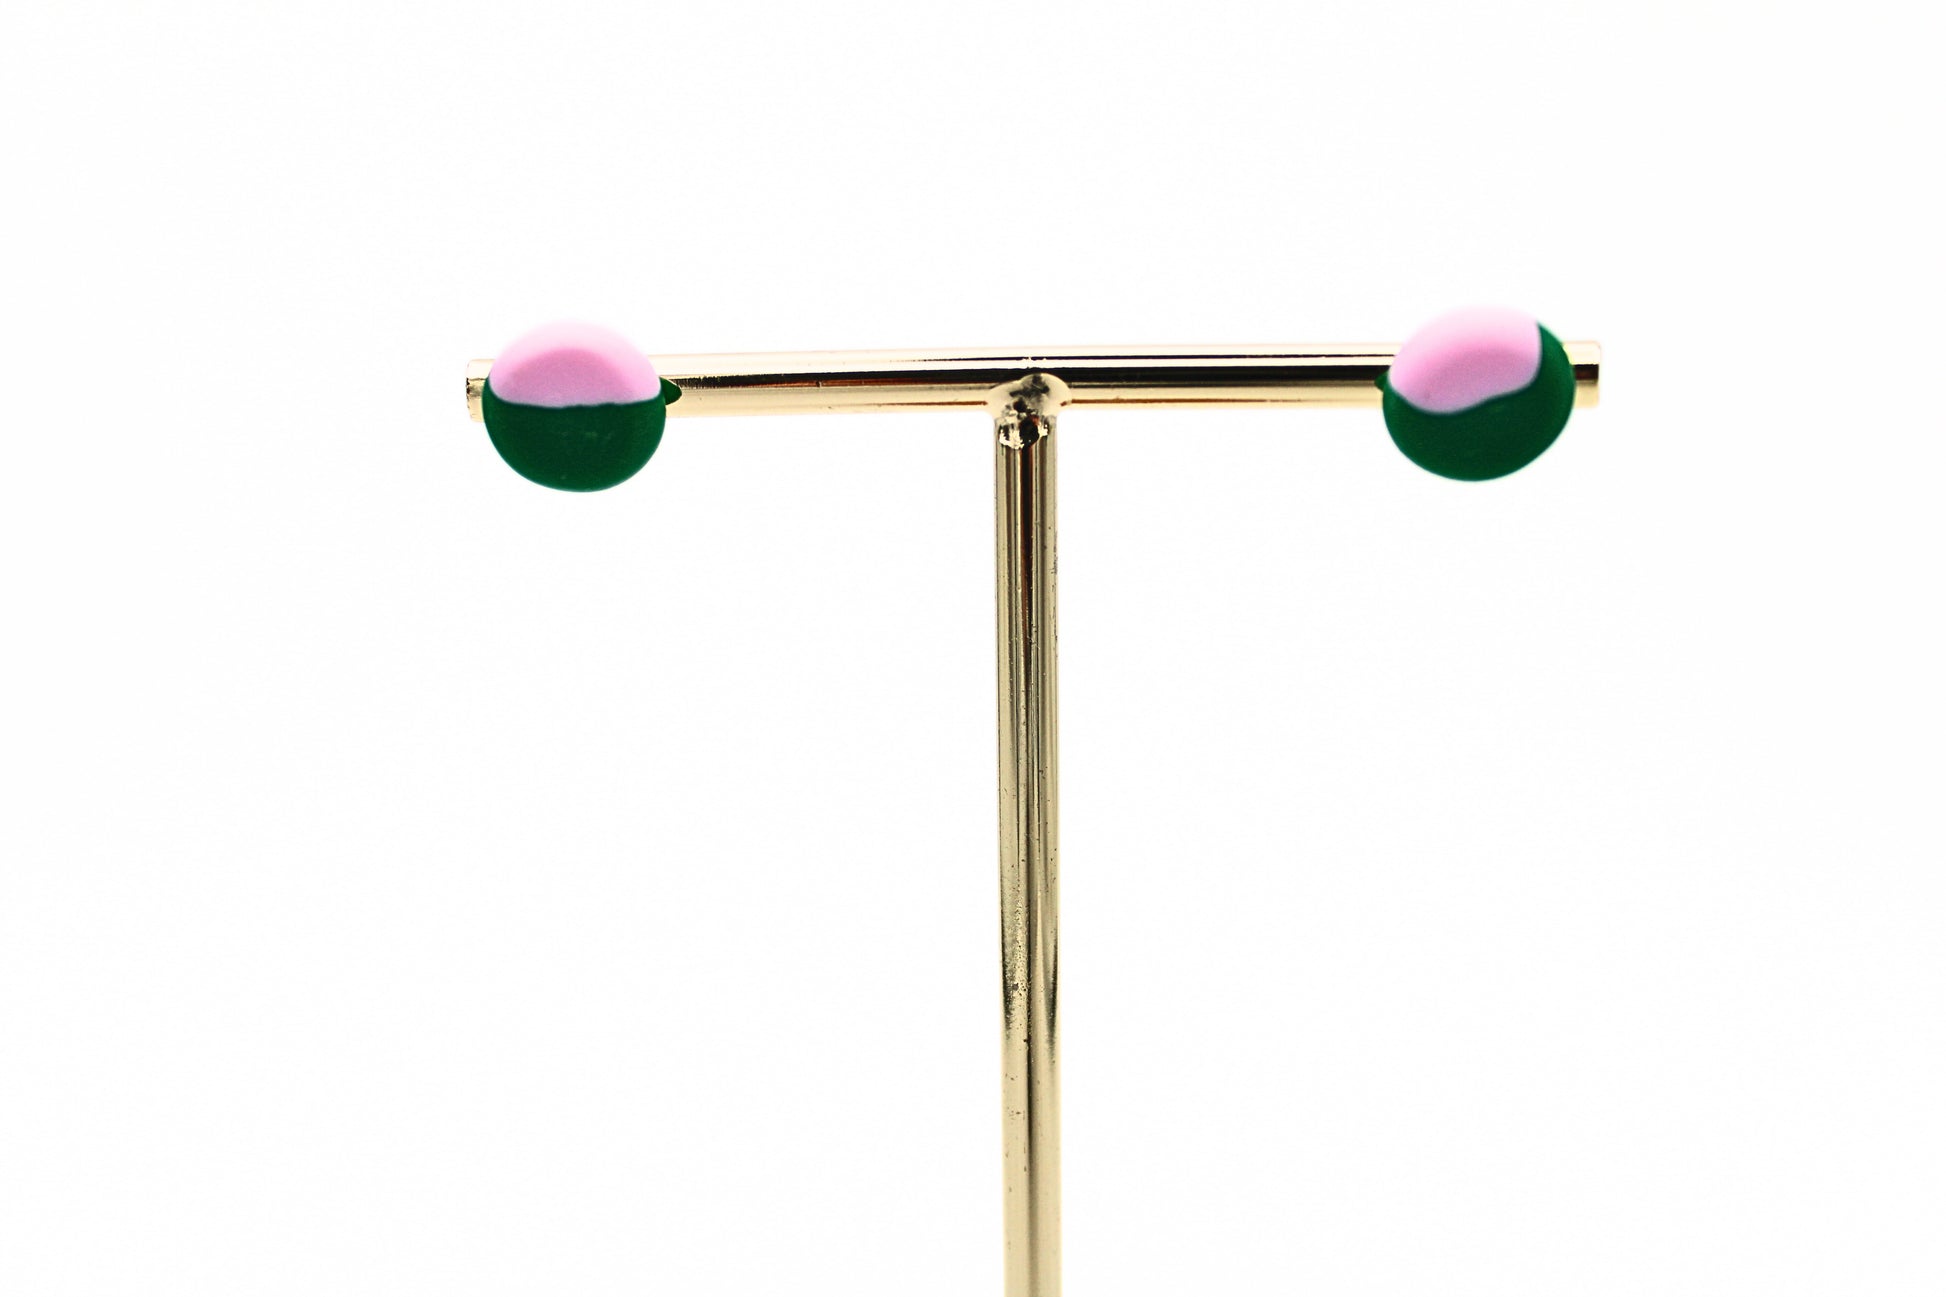 Punch+Fable Mini Stud Earrings in Green and Pink on Jewellery Stand